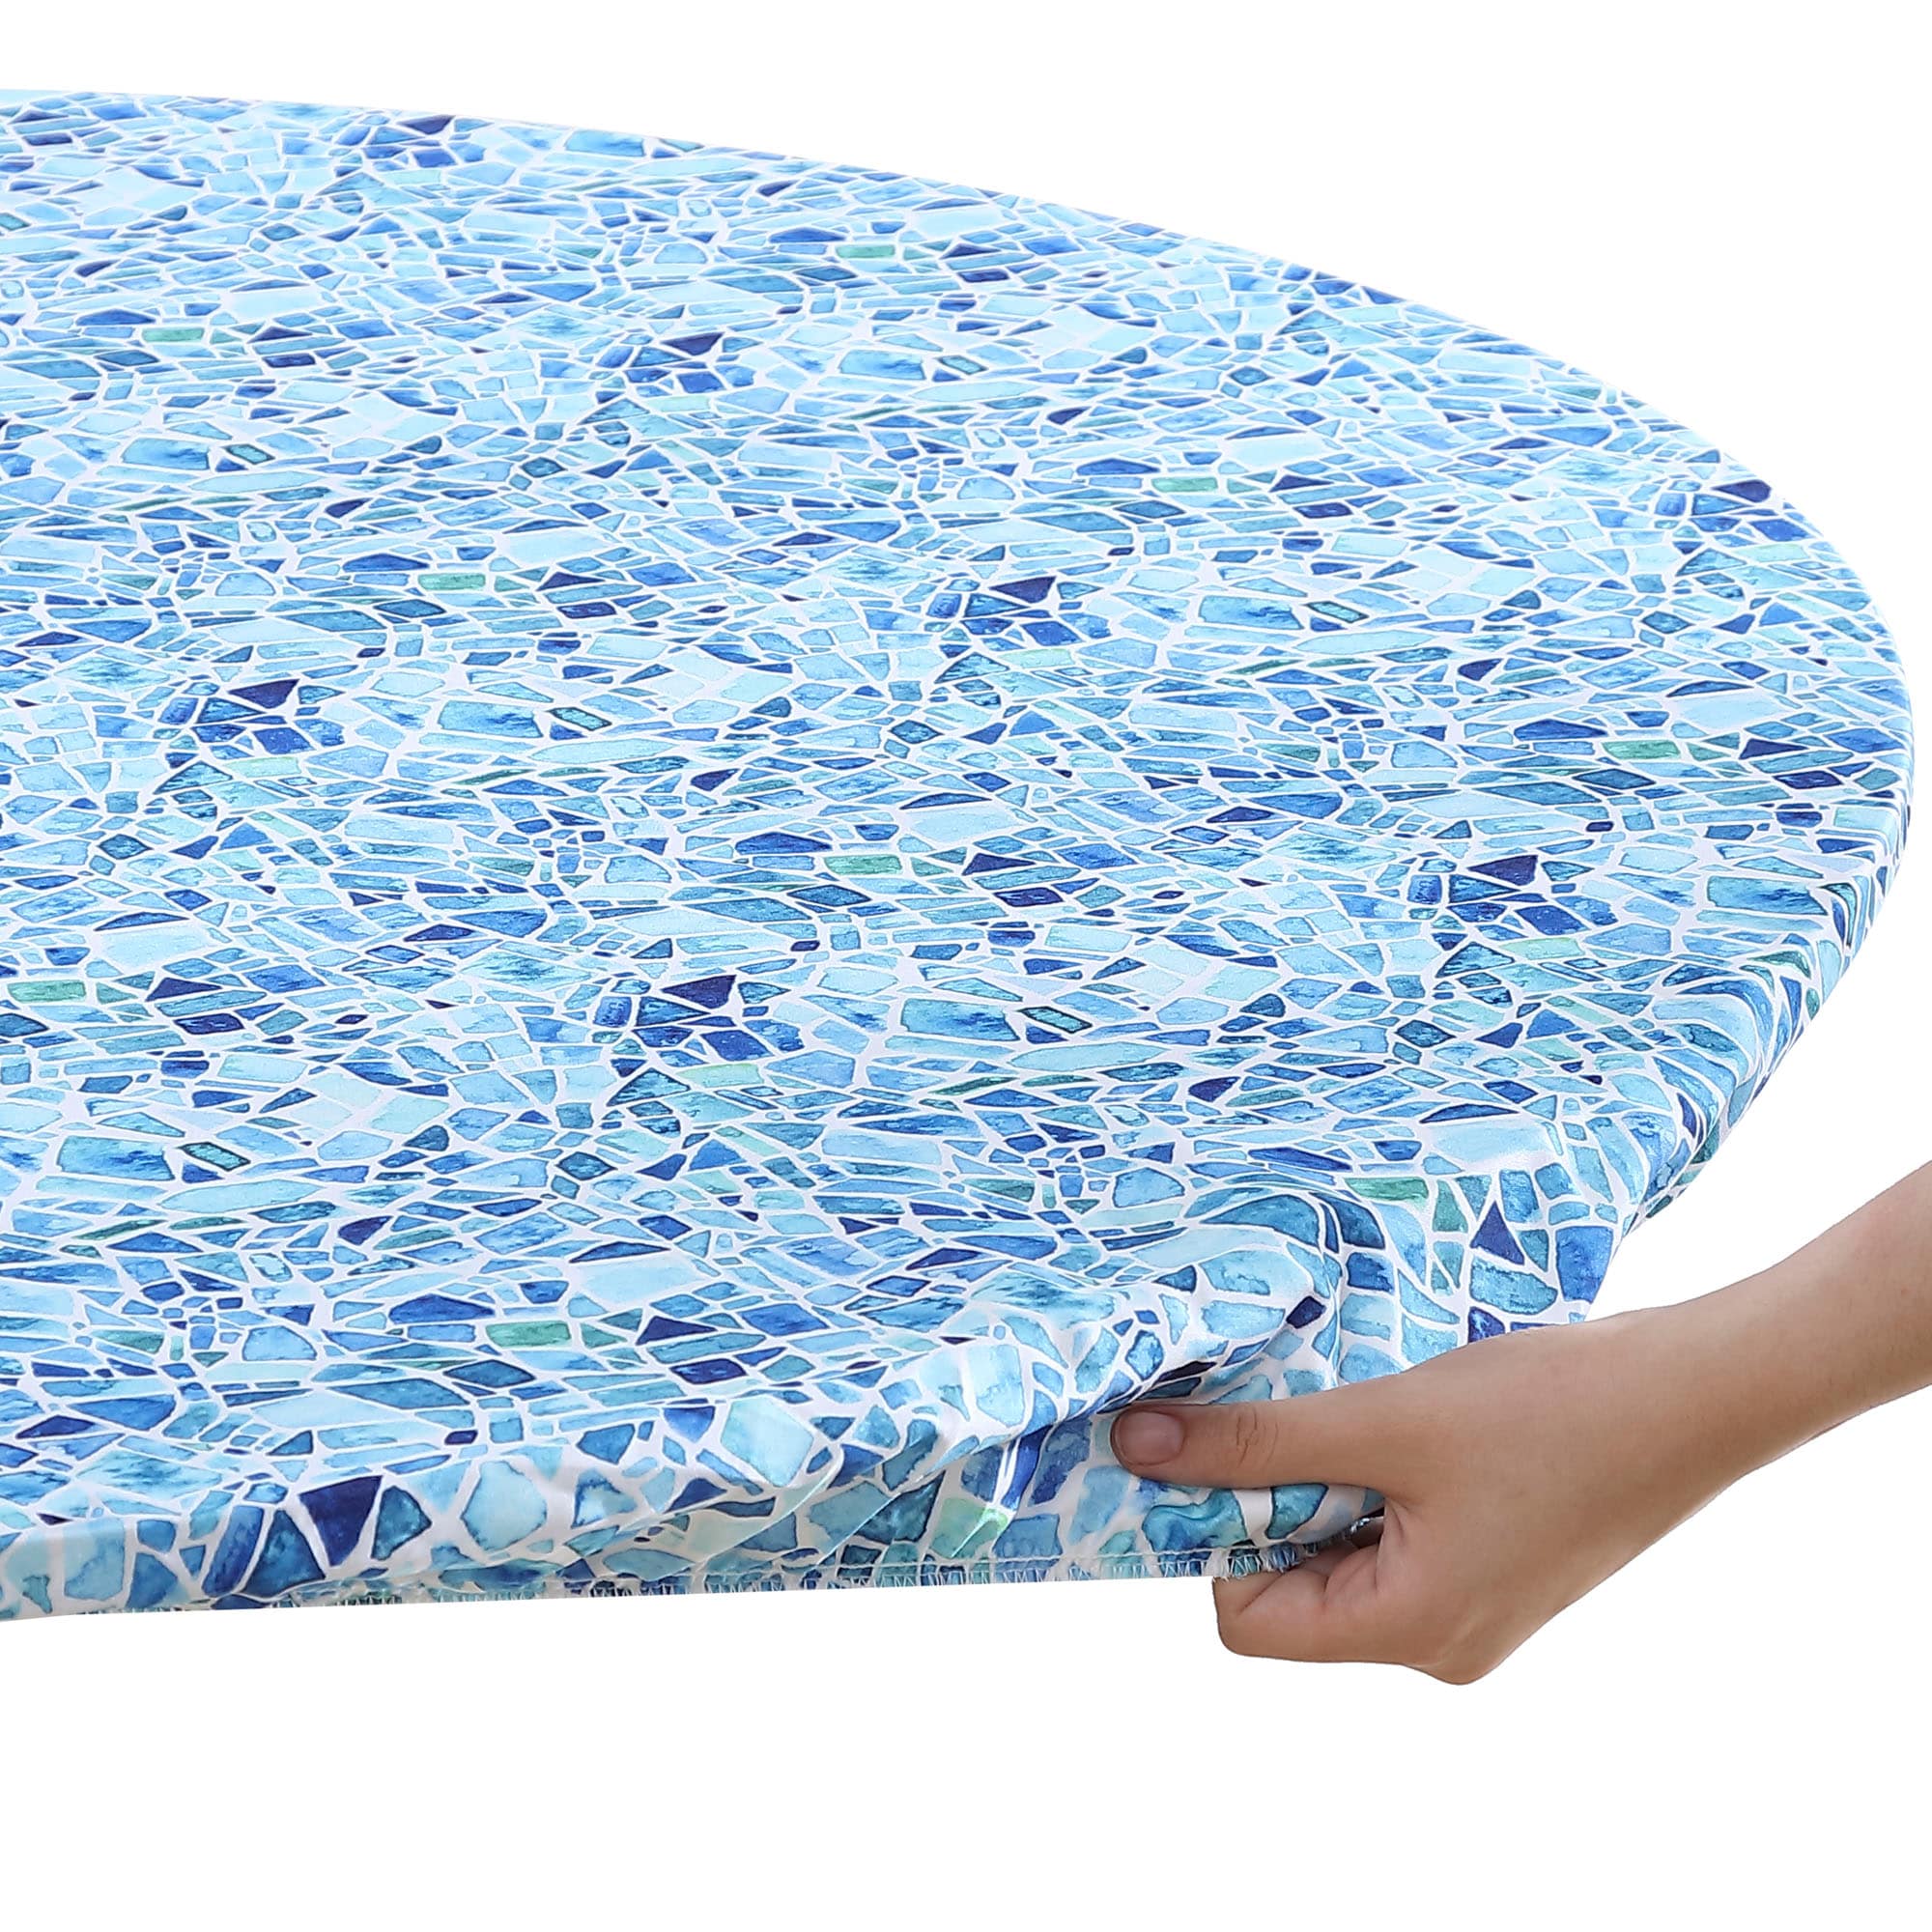 Details about   Mosaic Fitted Round Table Cover Indoor/Outdoor Decorative Stretch Cover NEW 